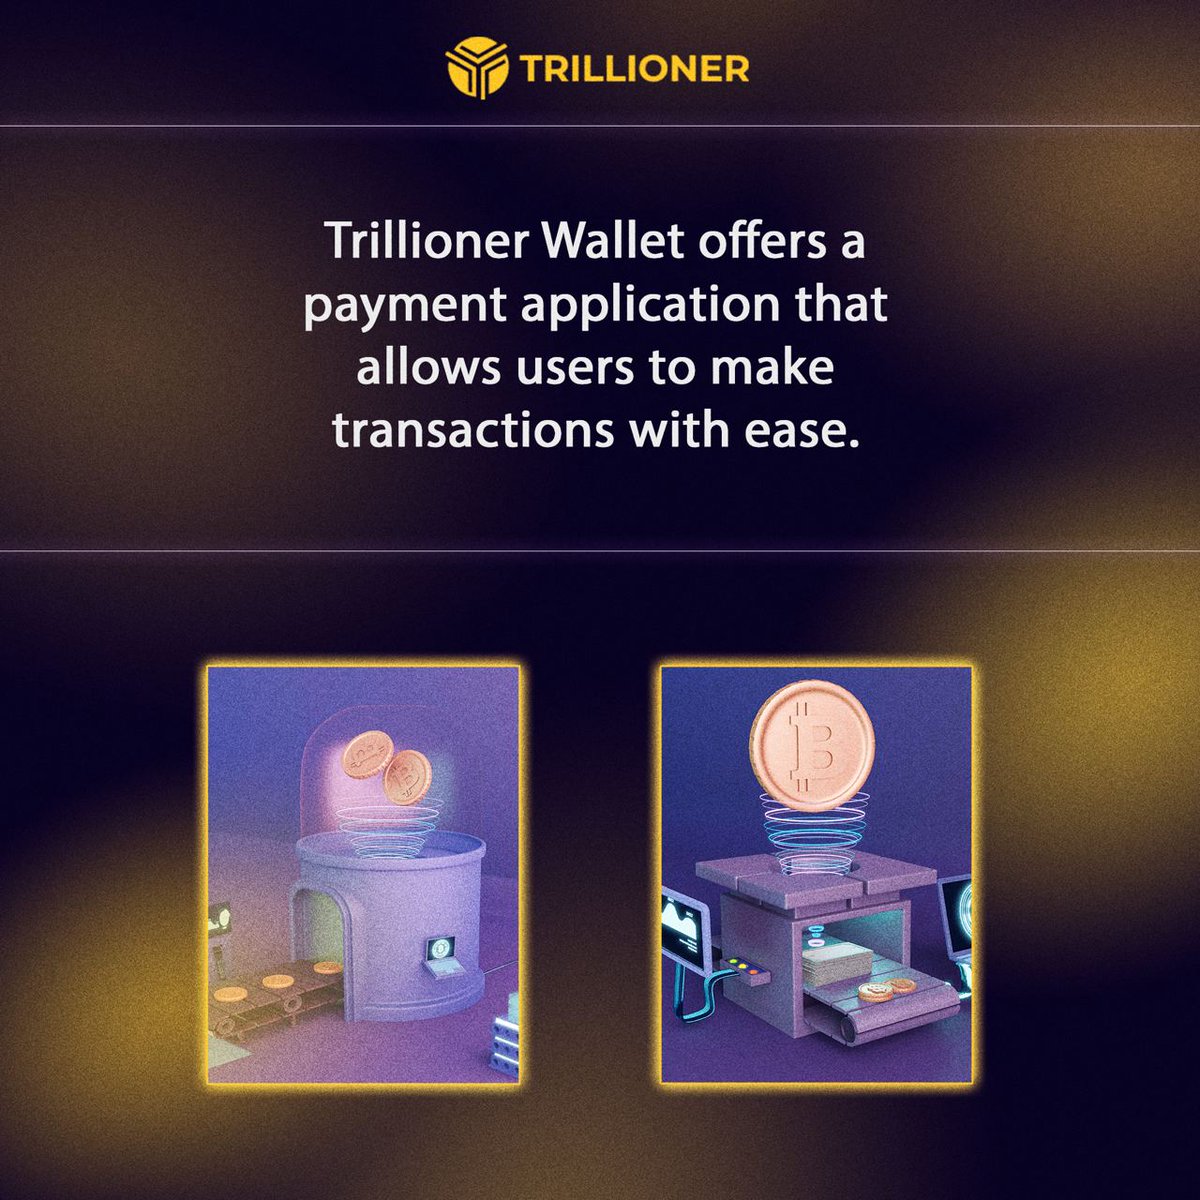 Trillioner Wallet offers a payment application that allows users to make transactions with ease.

#Trillioner #TLC #cryptotrading #CryptoNews #cryptocurrency